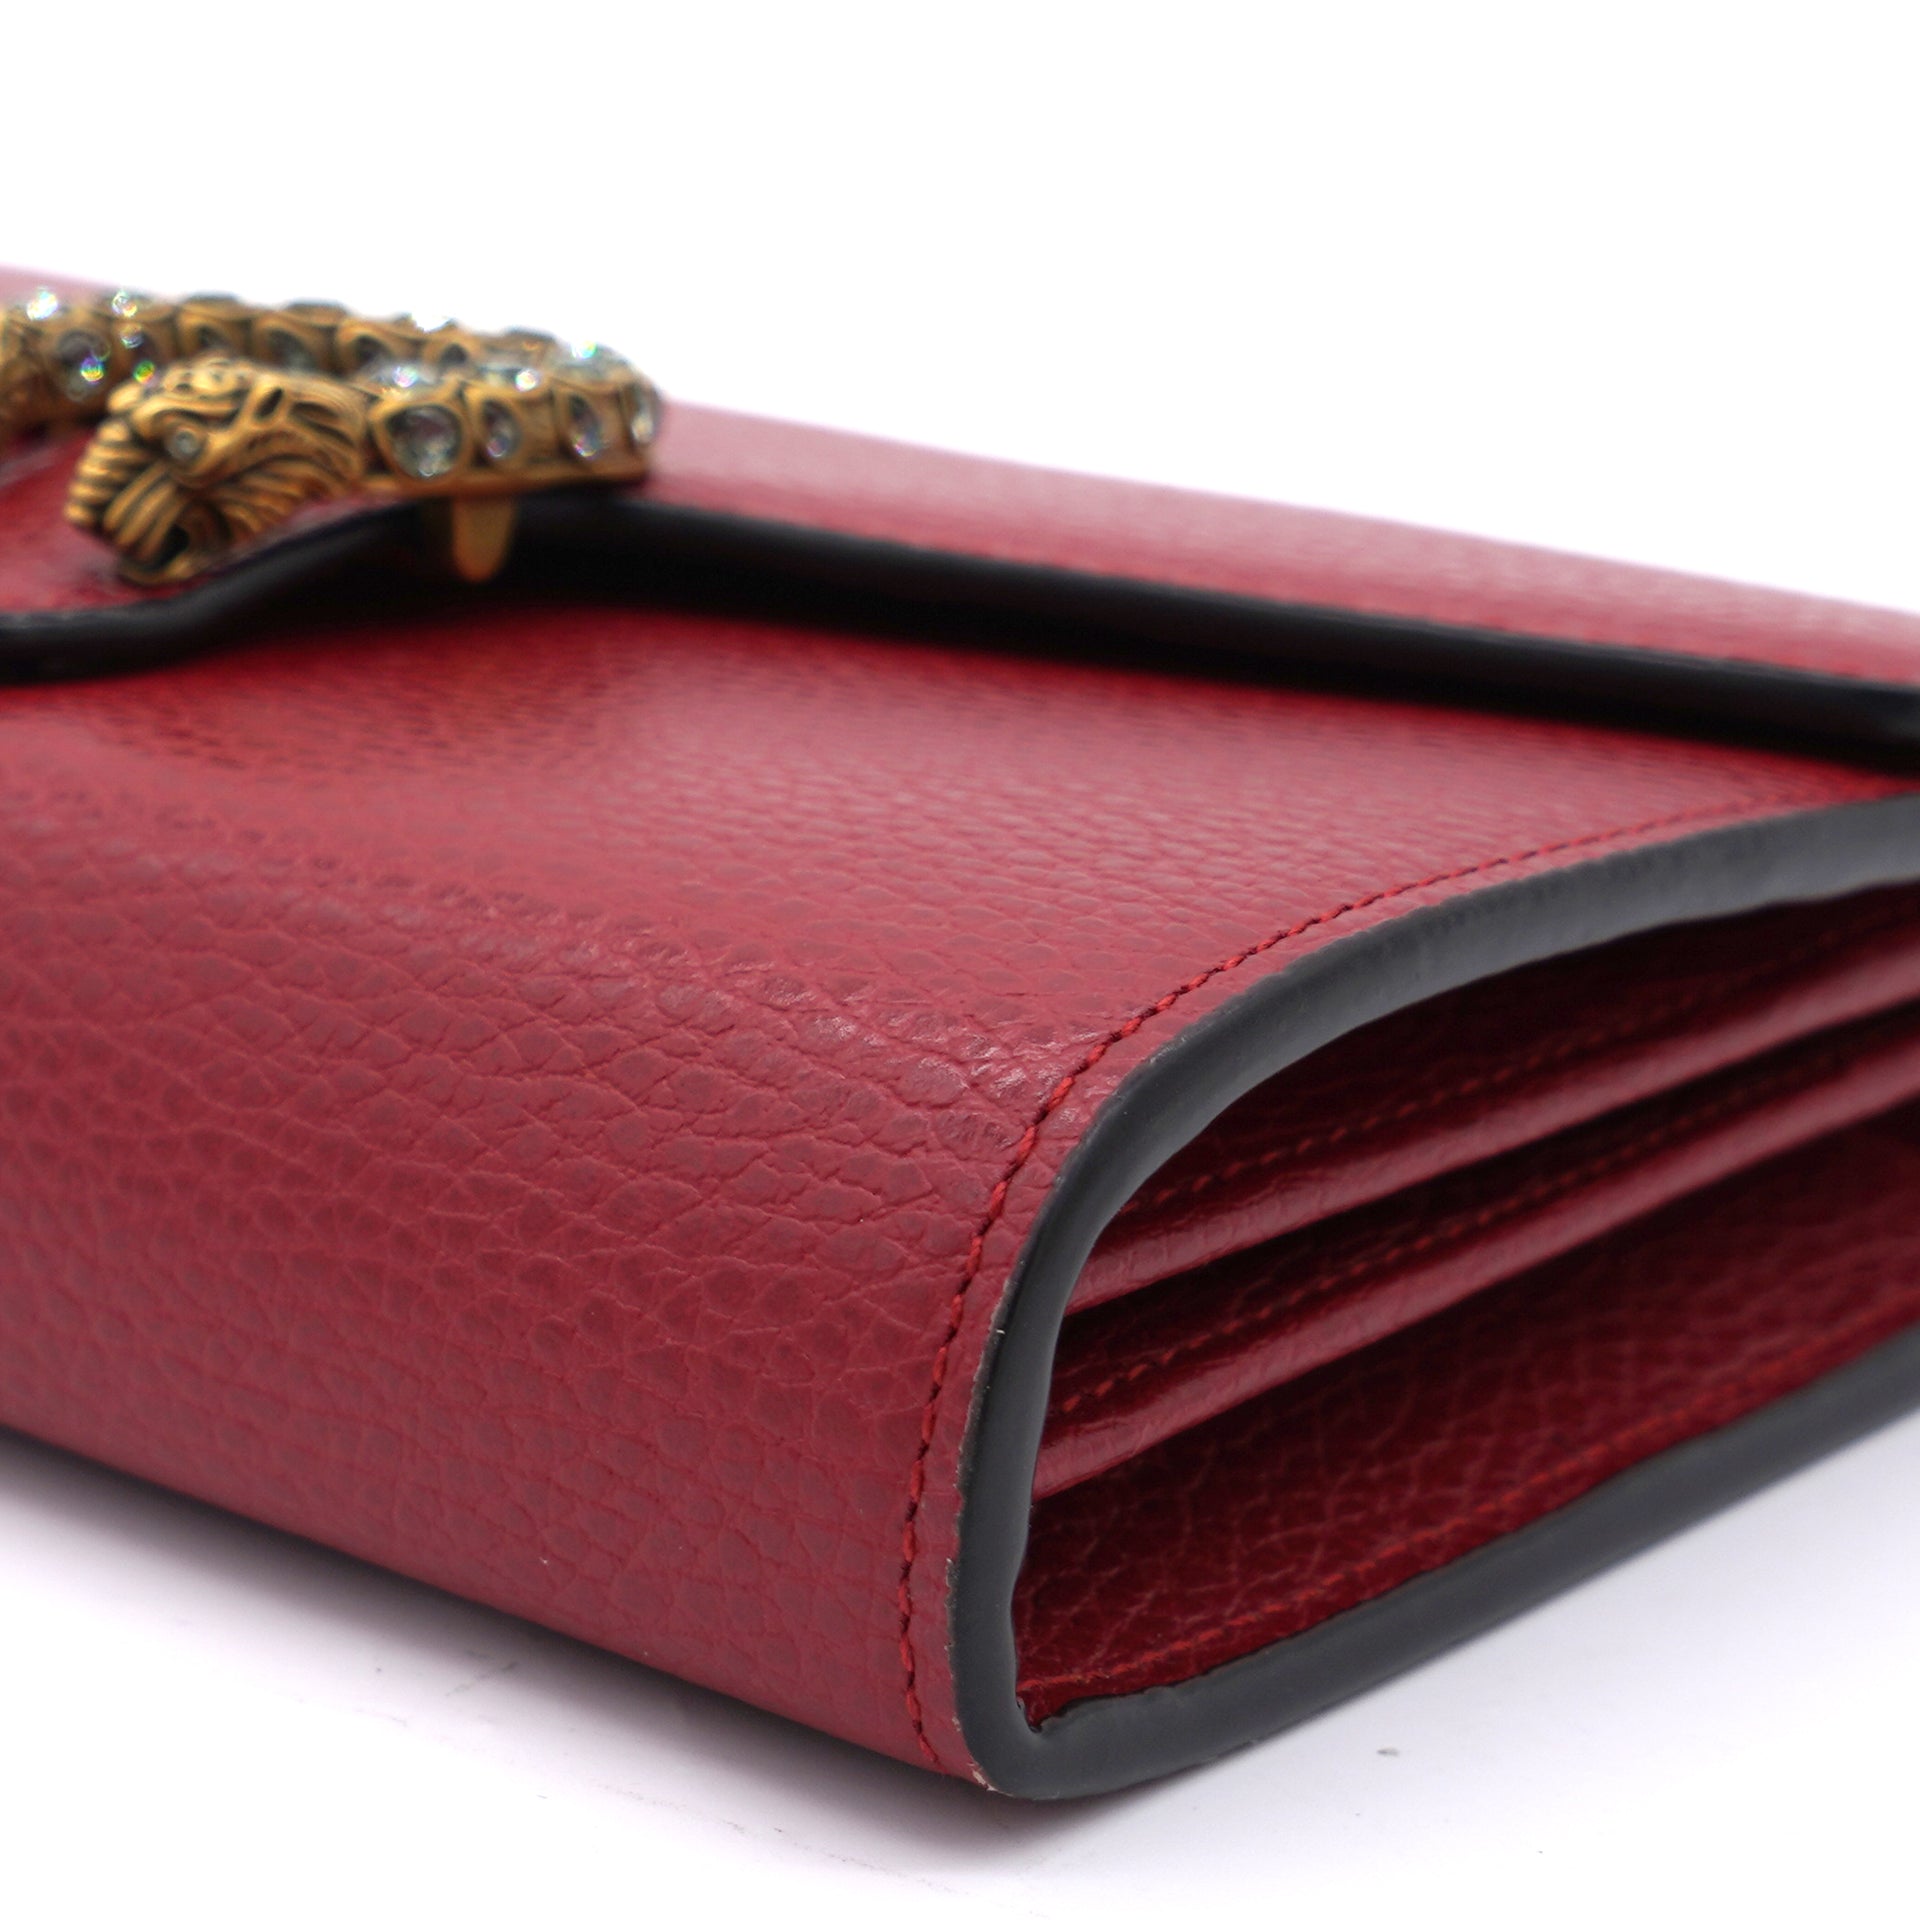 Red Leather Dionysus Wallet On Chain